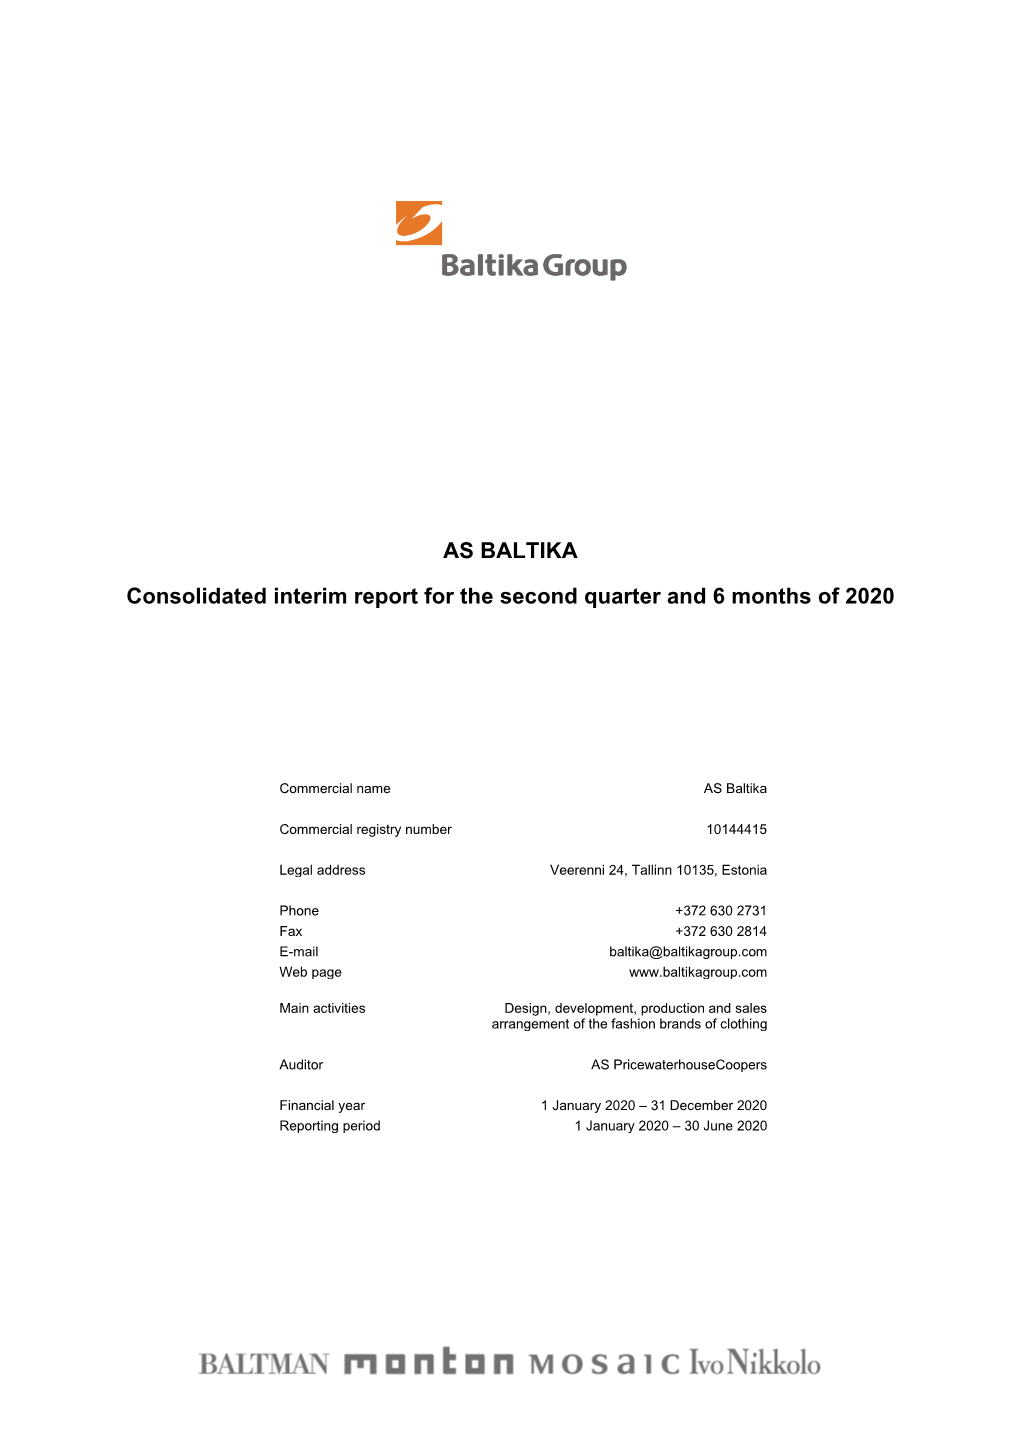 AS BALTIKA Consolidated Interim Report for the Second Quarter and 6